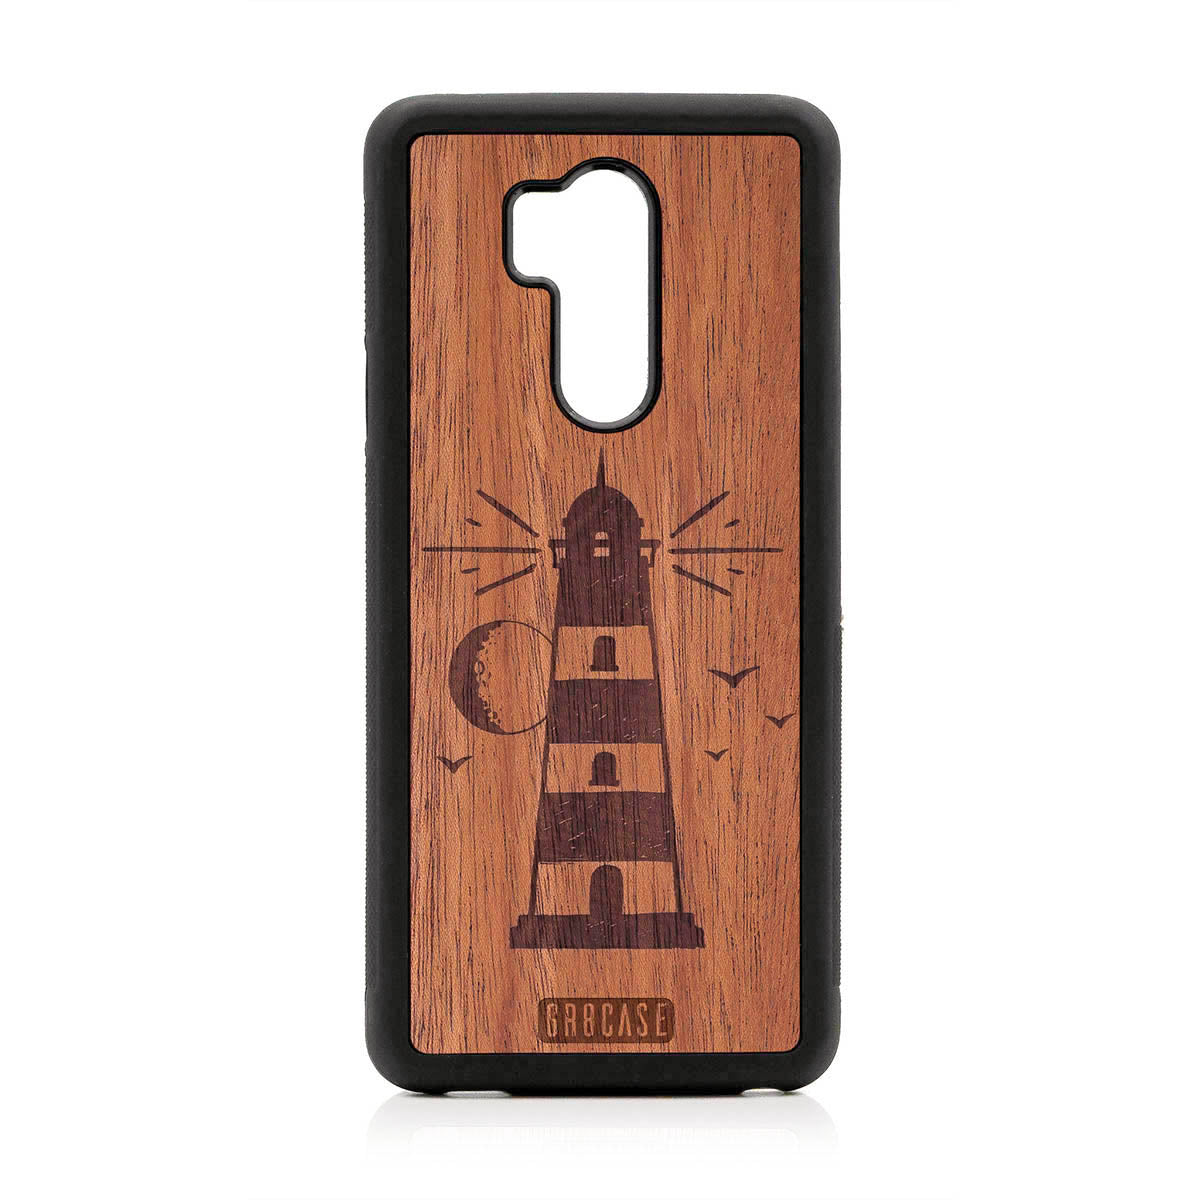 Midnight Lighthouse Design Wood Case For LG G7 ThinQ